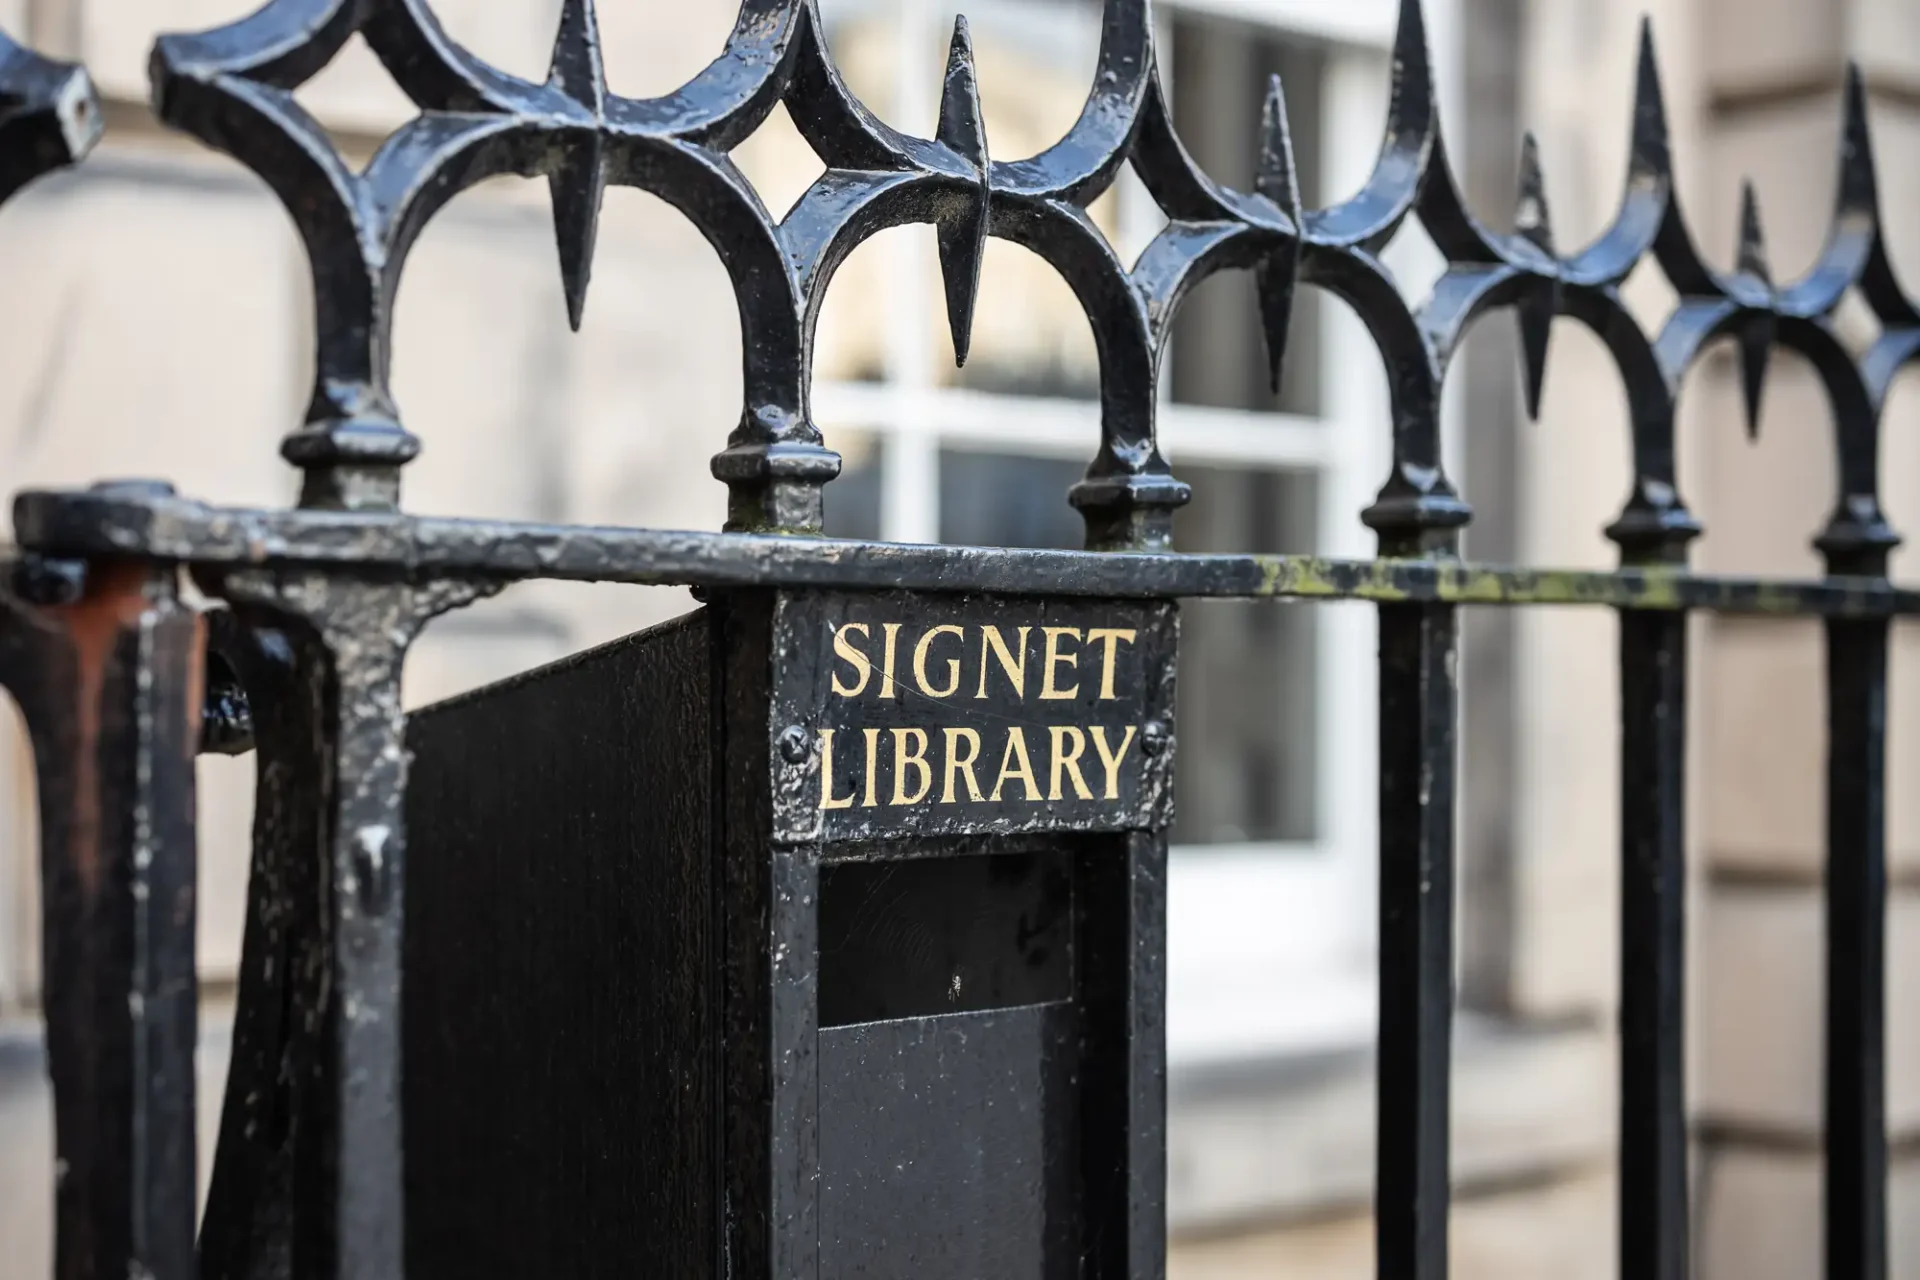 Close-up of a black iron fence with sharp, ornate spikes and a plate marked "signet library" attached to one of the bars.